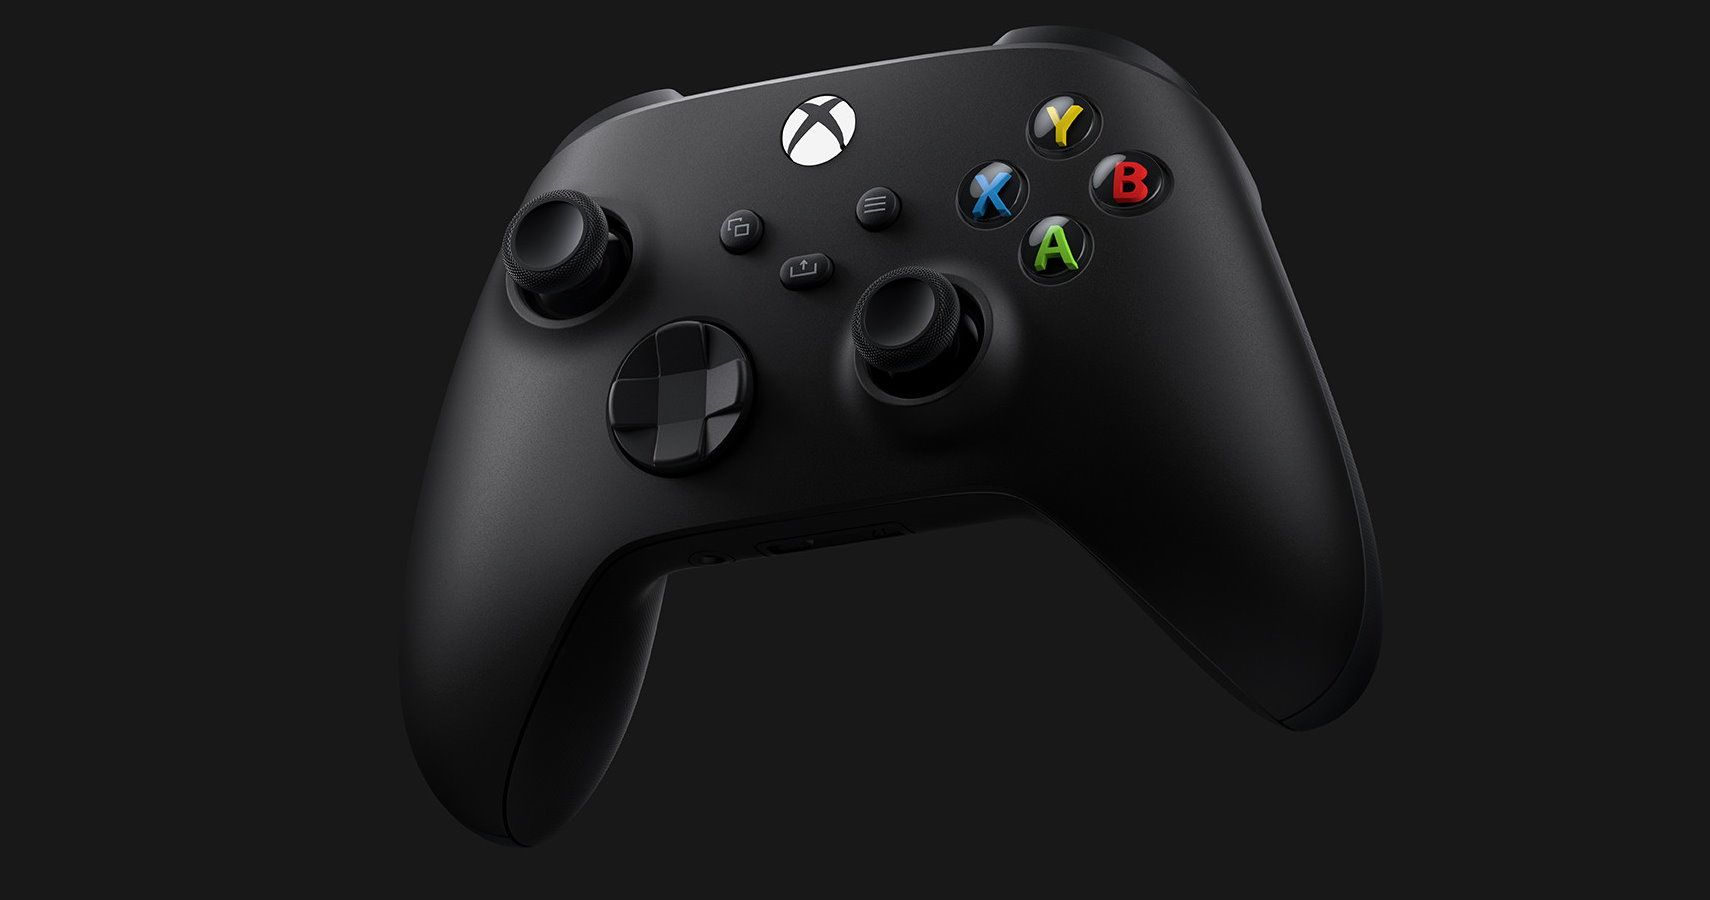 Microsoft Is Adding DLI To Xbox One Controllers To Make Them Work With Xbox Series X